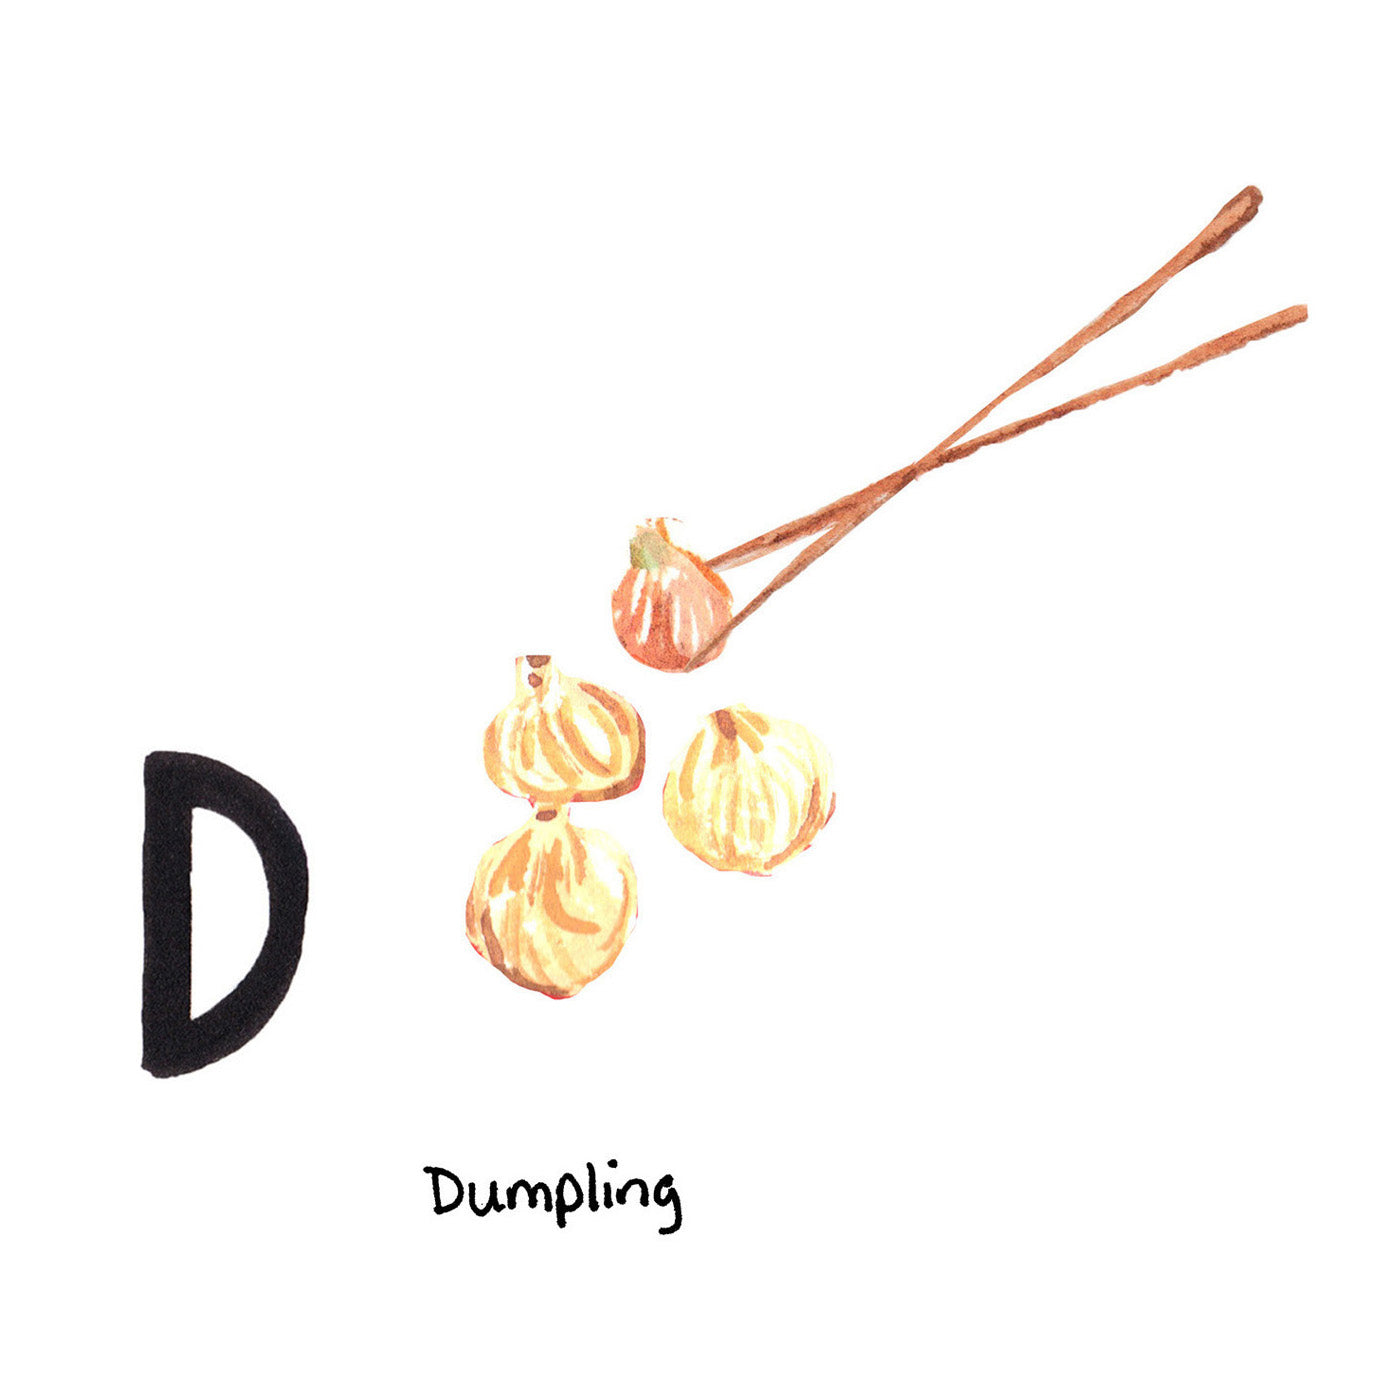 D is for Dumpling. Chinatown in Lower Manhattan is home to the highest concentration of Chinese people in the Western Hemisphere, and is home to over 300 restaurants.